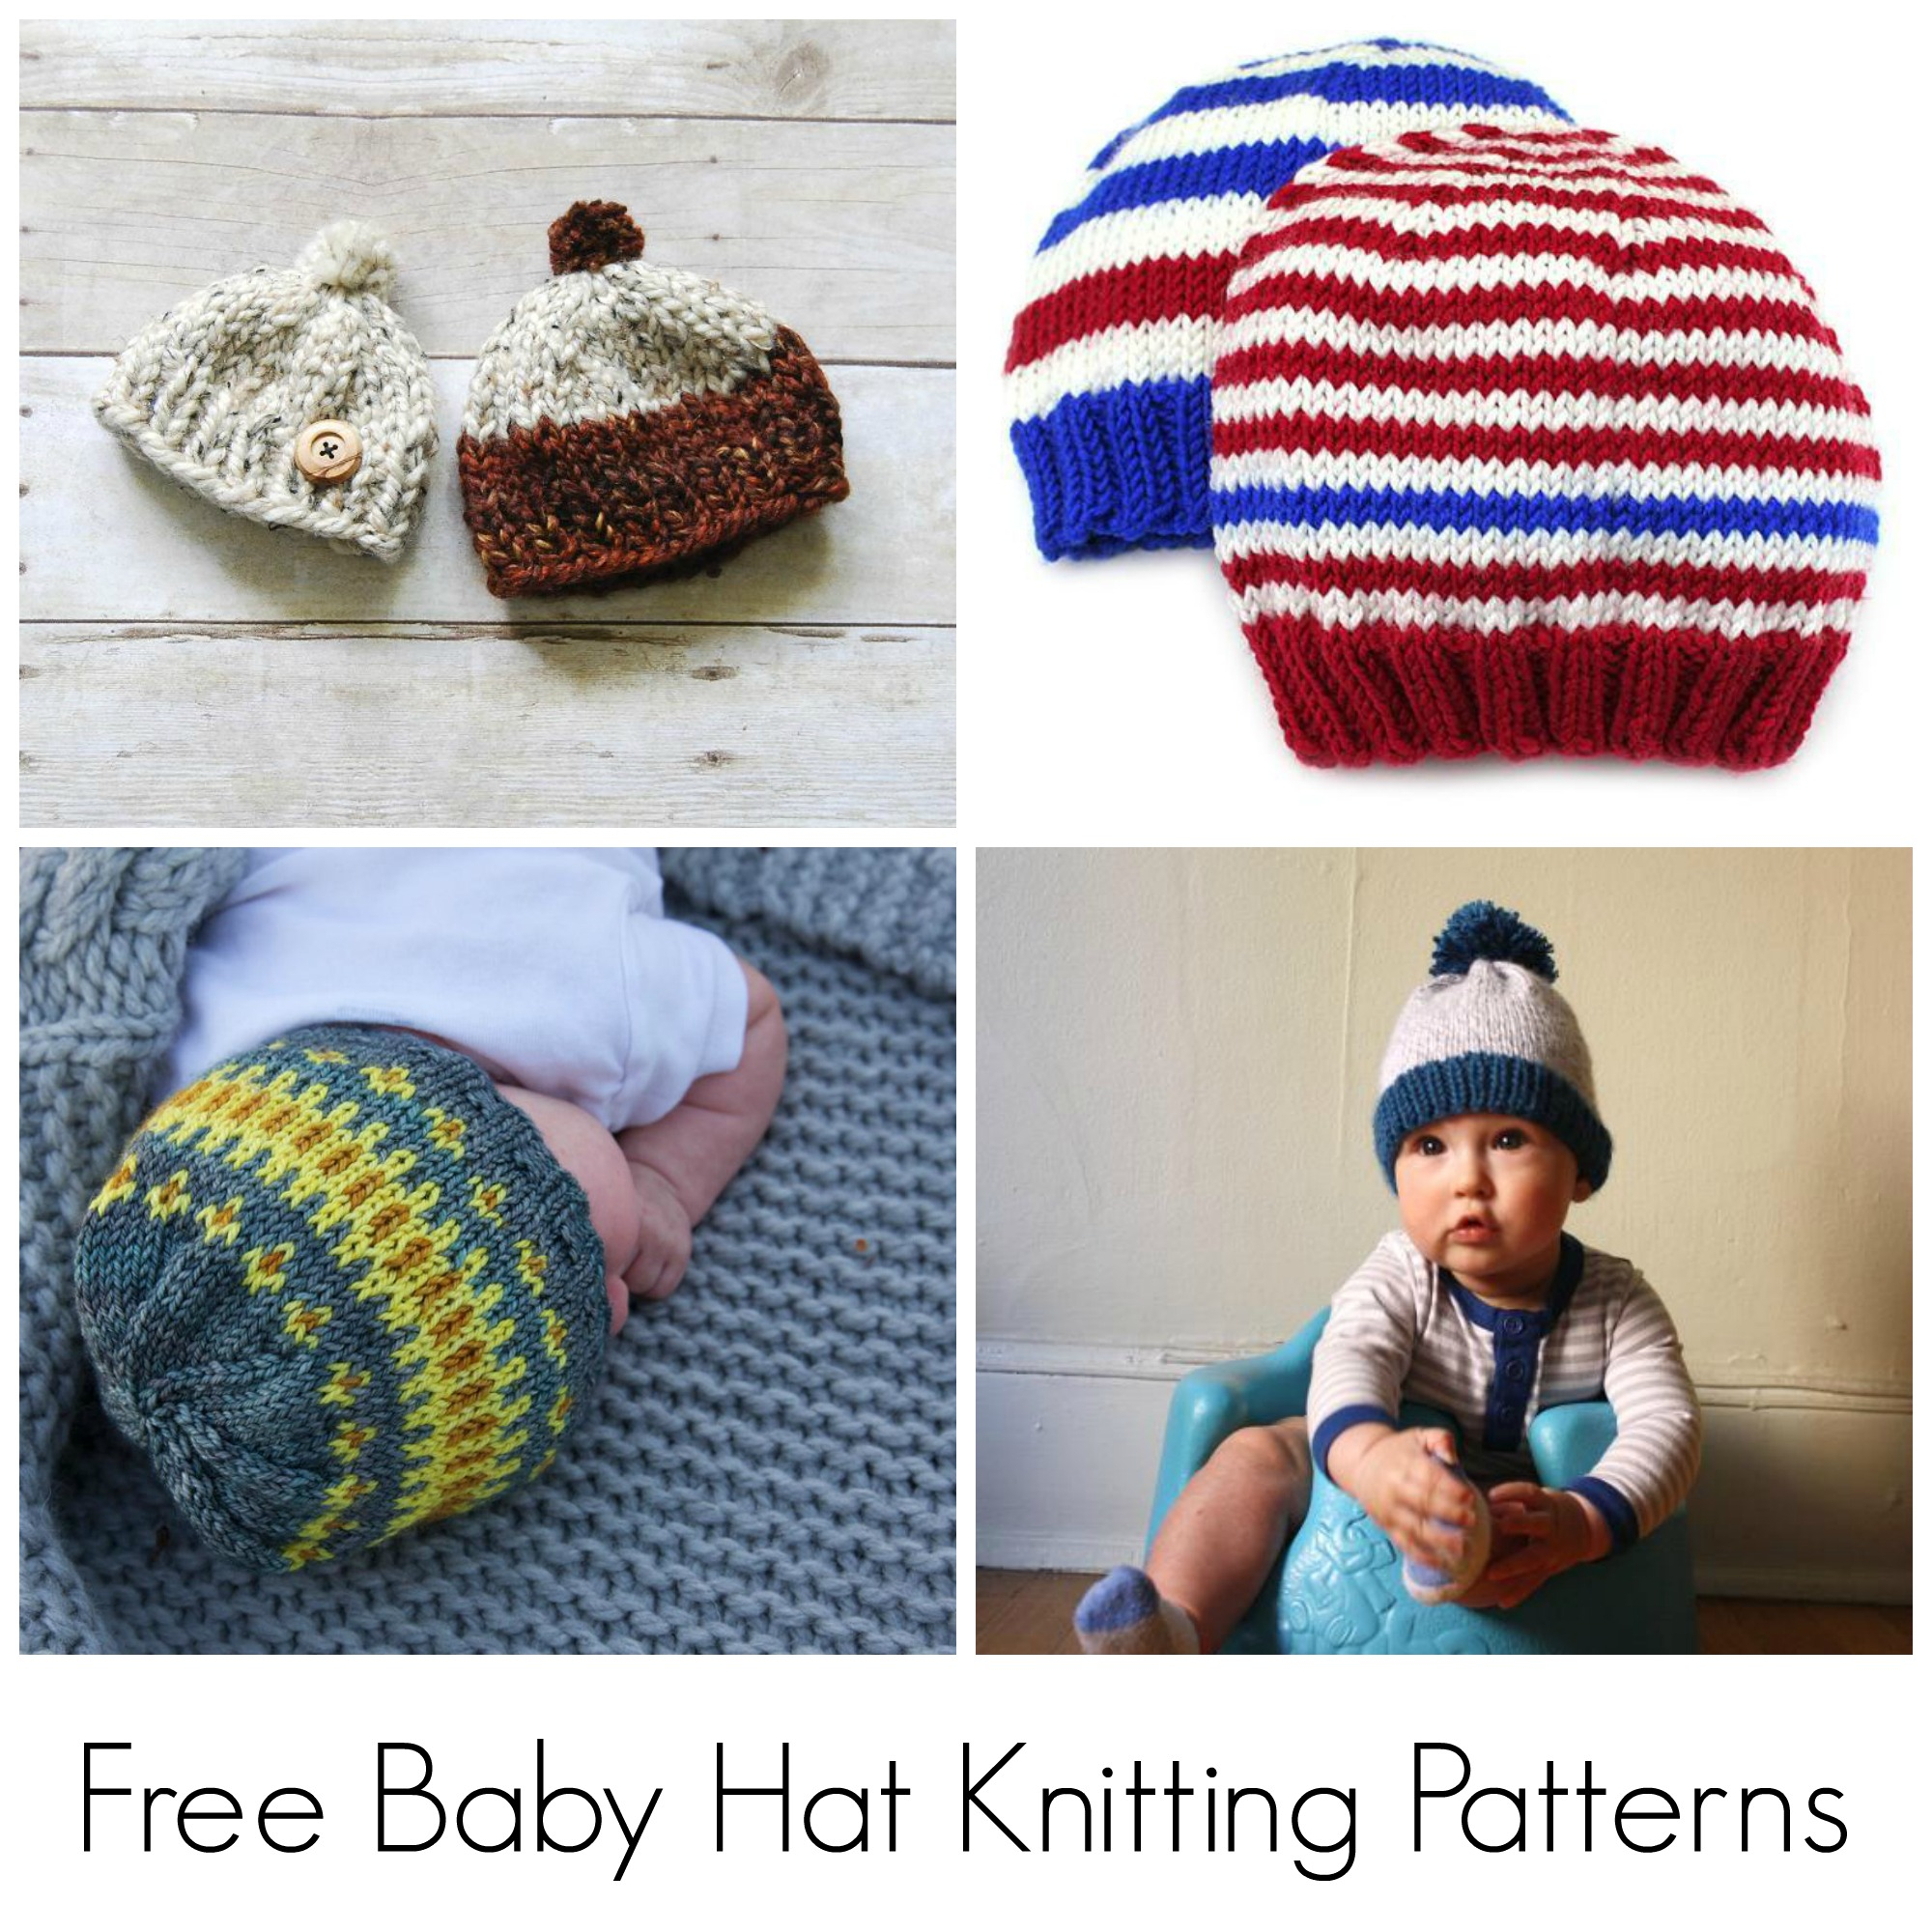 Knit Cap Patterns 10 Free Knitting Patterns For Ba Hats On Craftsy